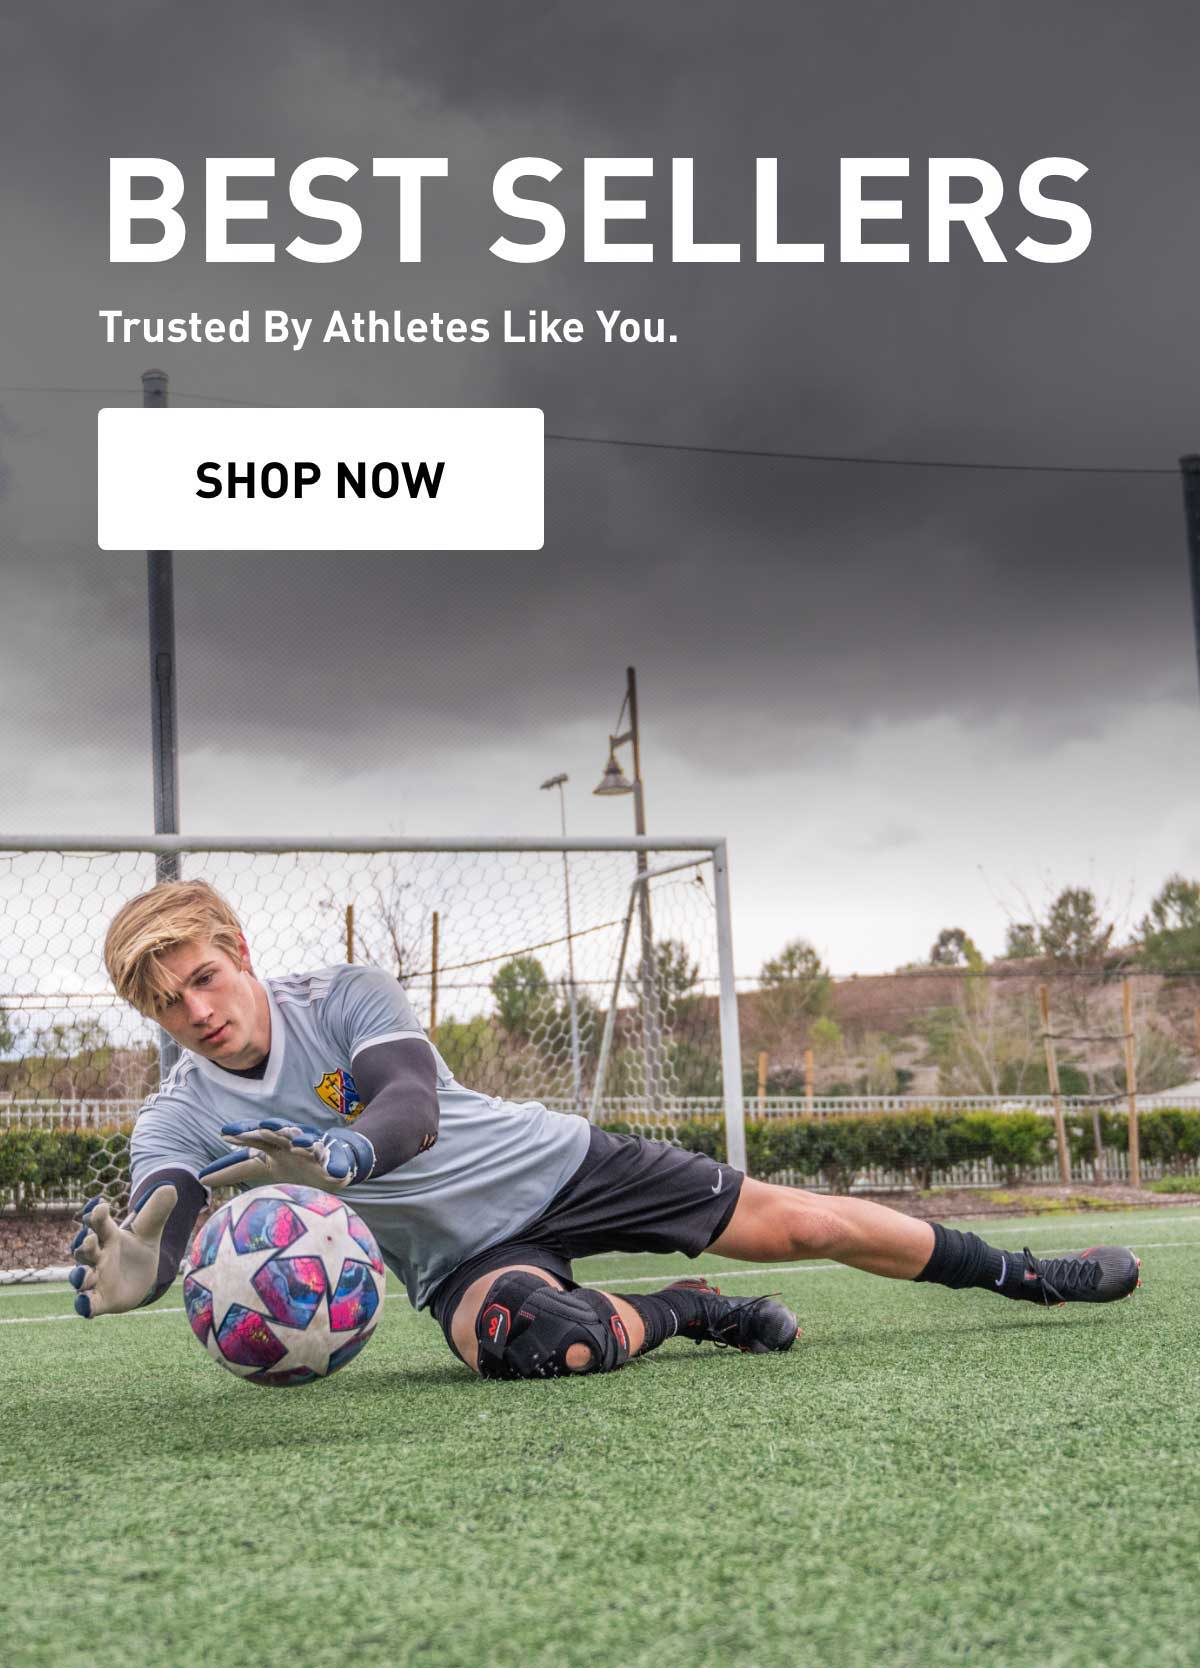 Best Sellers - Trusted By Athletes Like You. - SHOP TOP SELLERS